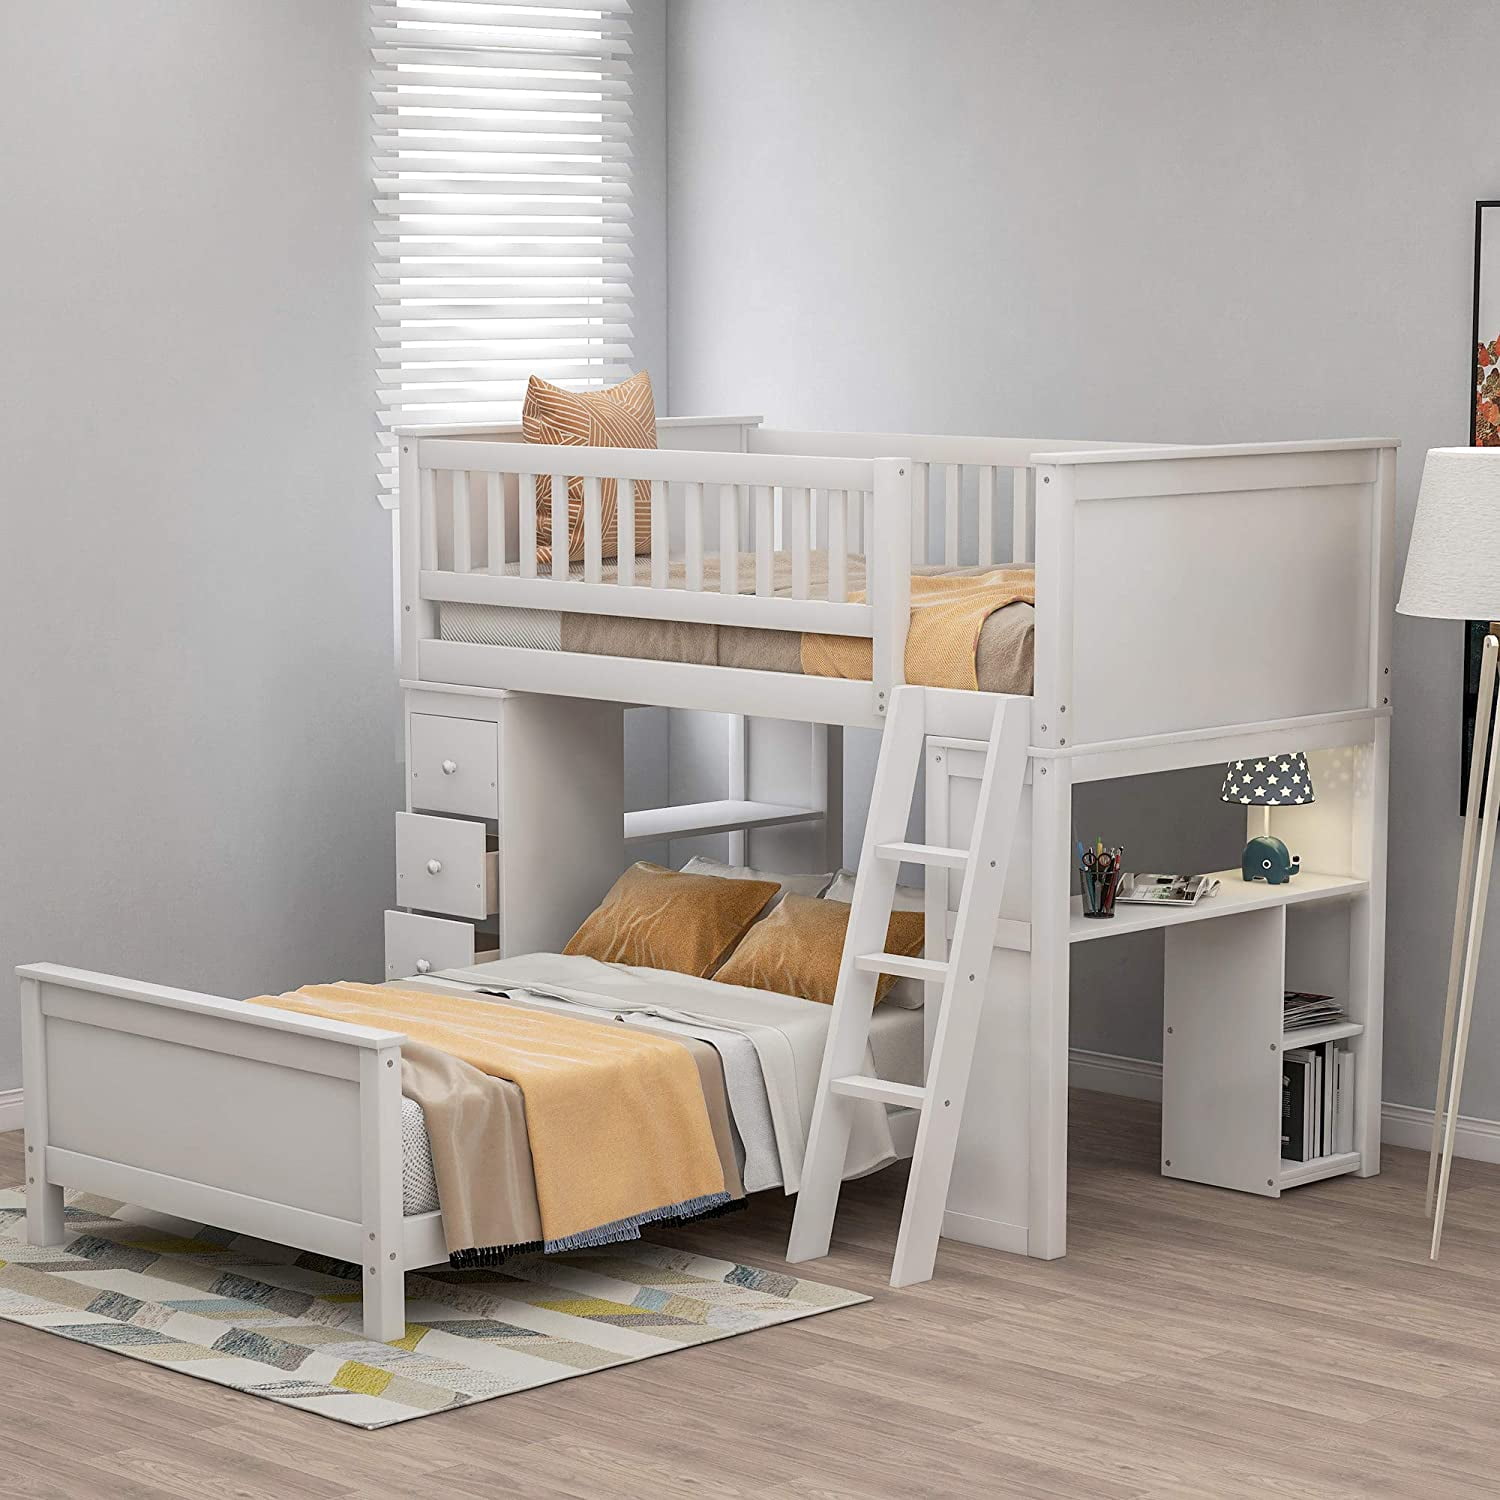 Bunk Bed Twin Over Loft, Bunk Bed Frame With Desk